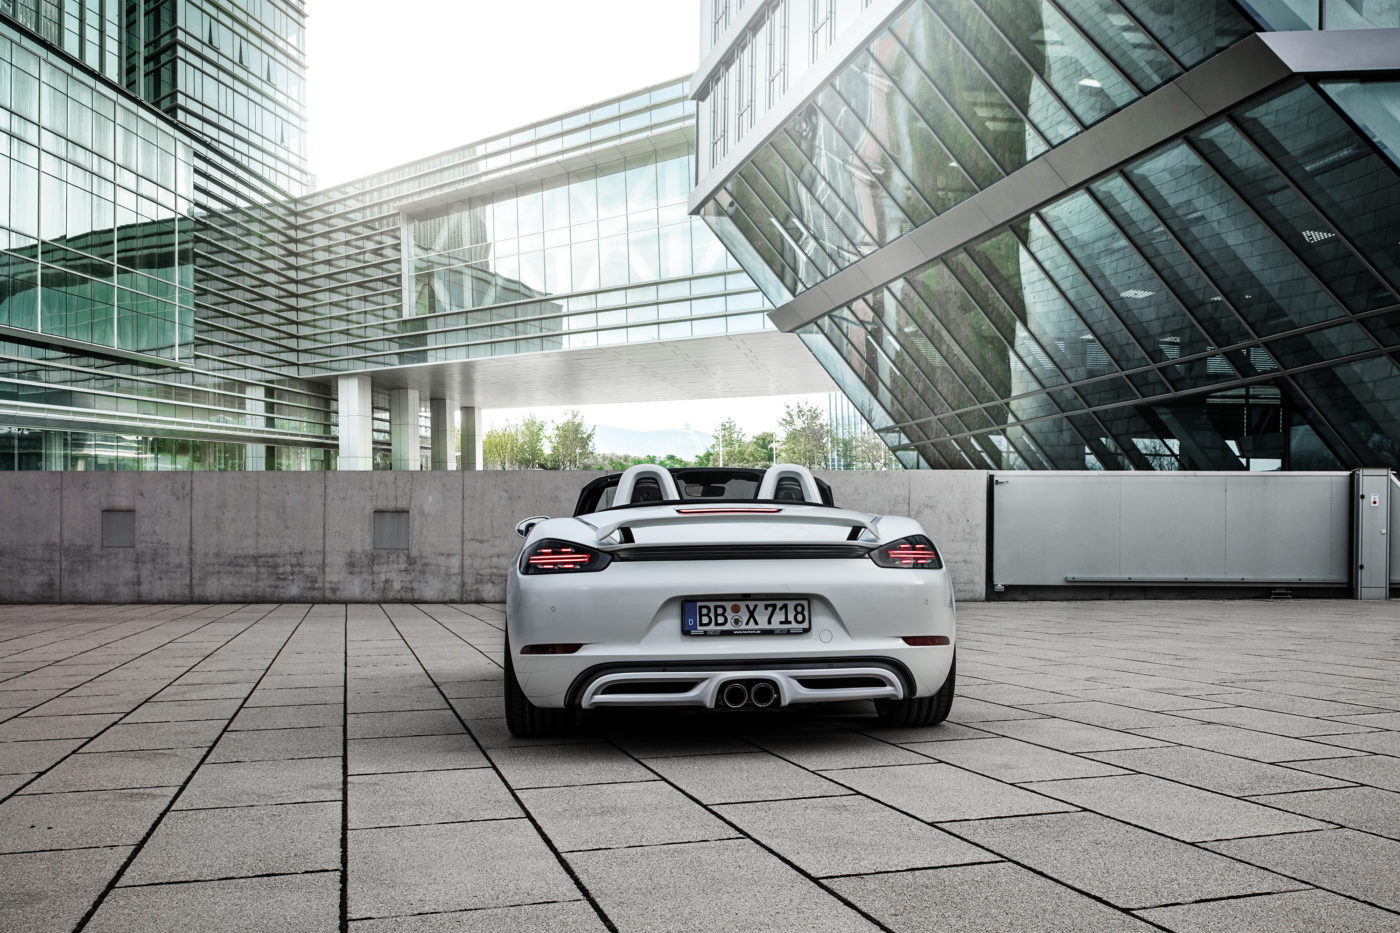 Porsche Cayman Boxster Techart Tuning in white, rear view.